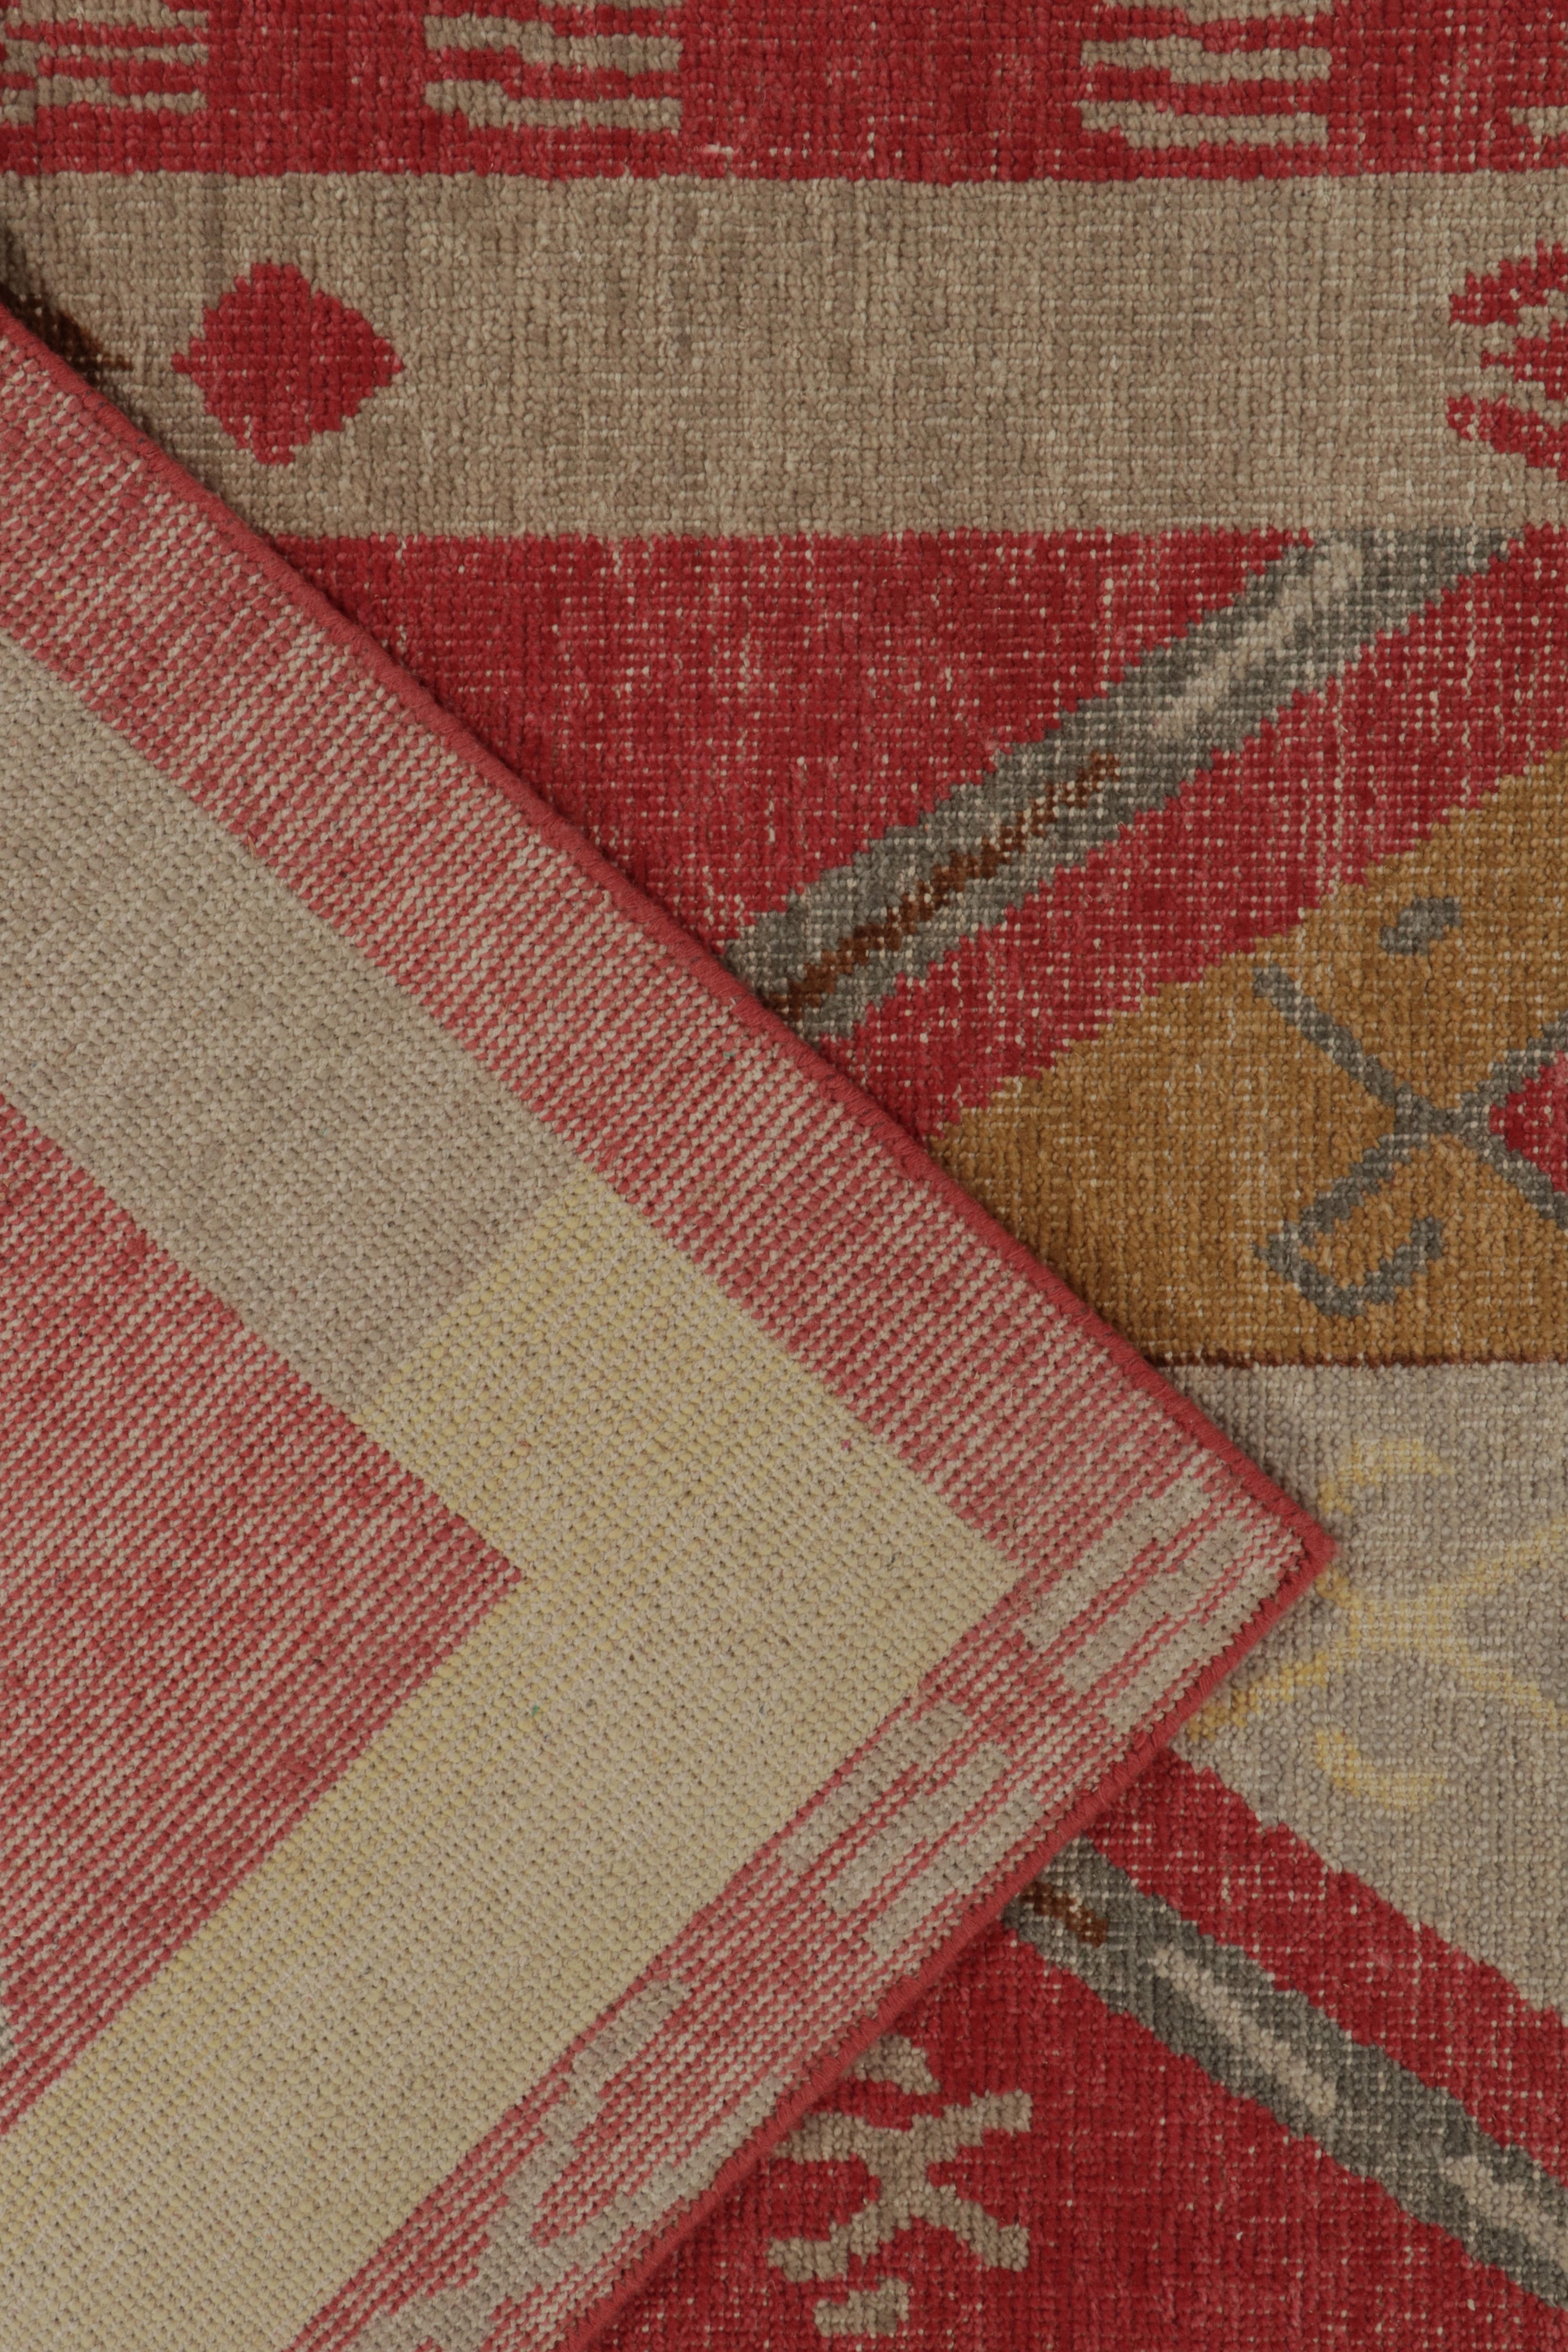 Rug & Kilim’s Distressed Yuruk Style Rug in Red, Beige & Gray Geometric Patterns In New Condition For Sale In Long Island City, NY